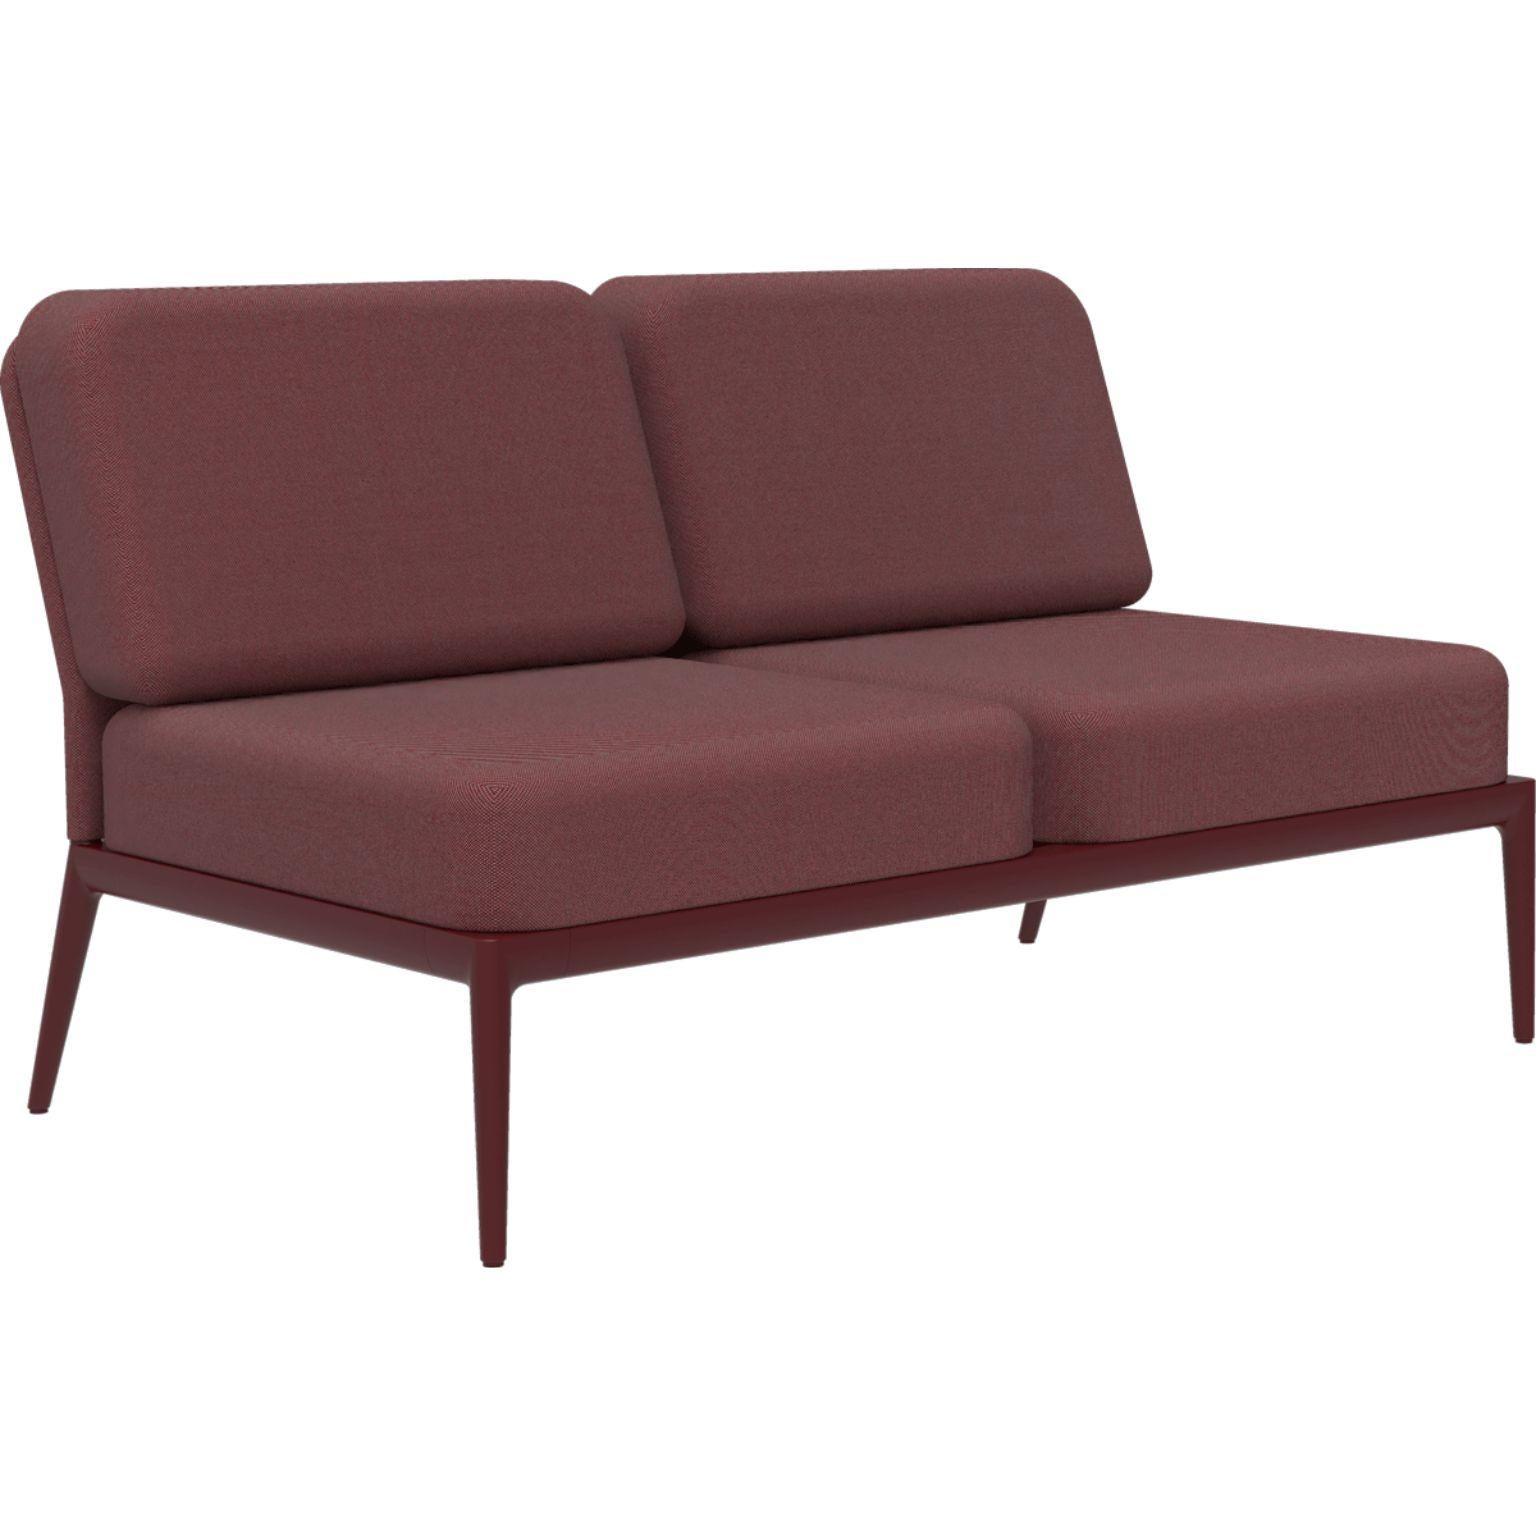 Cover Burgundy double central modular sofa by MOWEE
Dimensions: D 83 x W 136 x H 81 cm (seat height 42 cm).
Material: Aluminum and upholstery.
Weight: 27 kg.
Also available in different colors and finishes.

An unmistakable collection for its